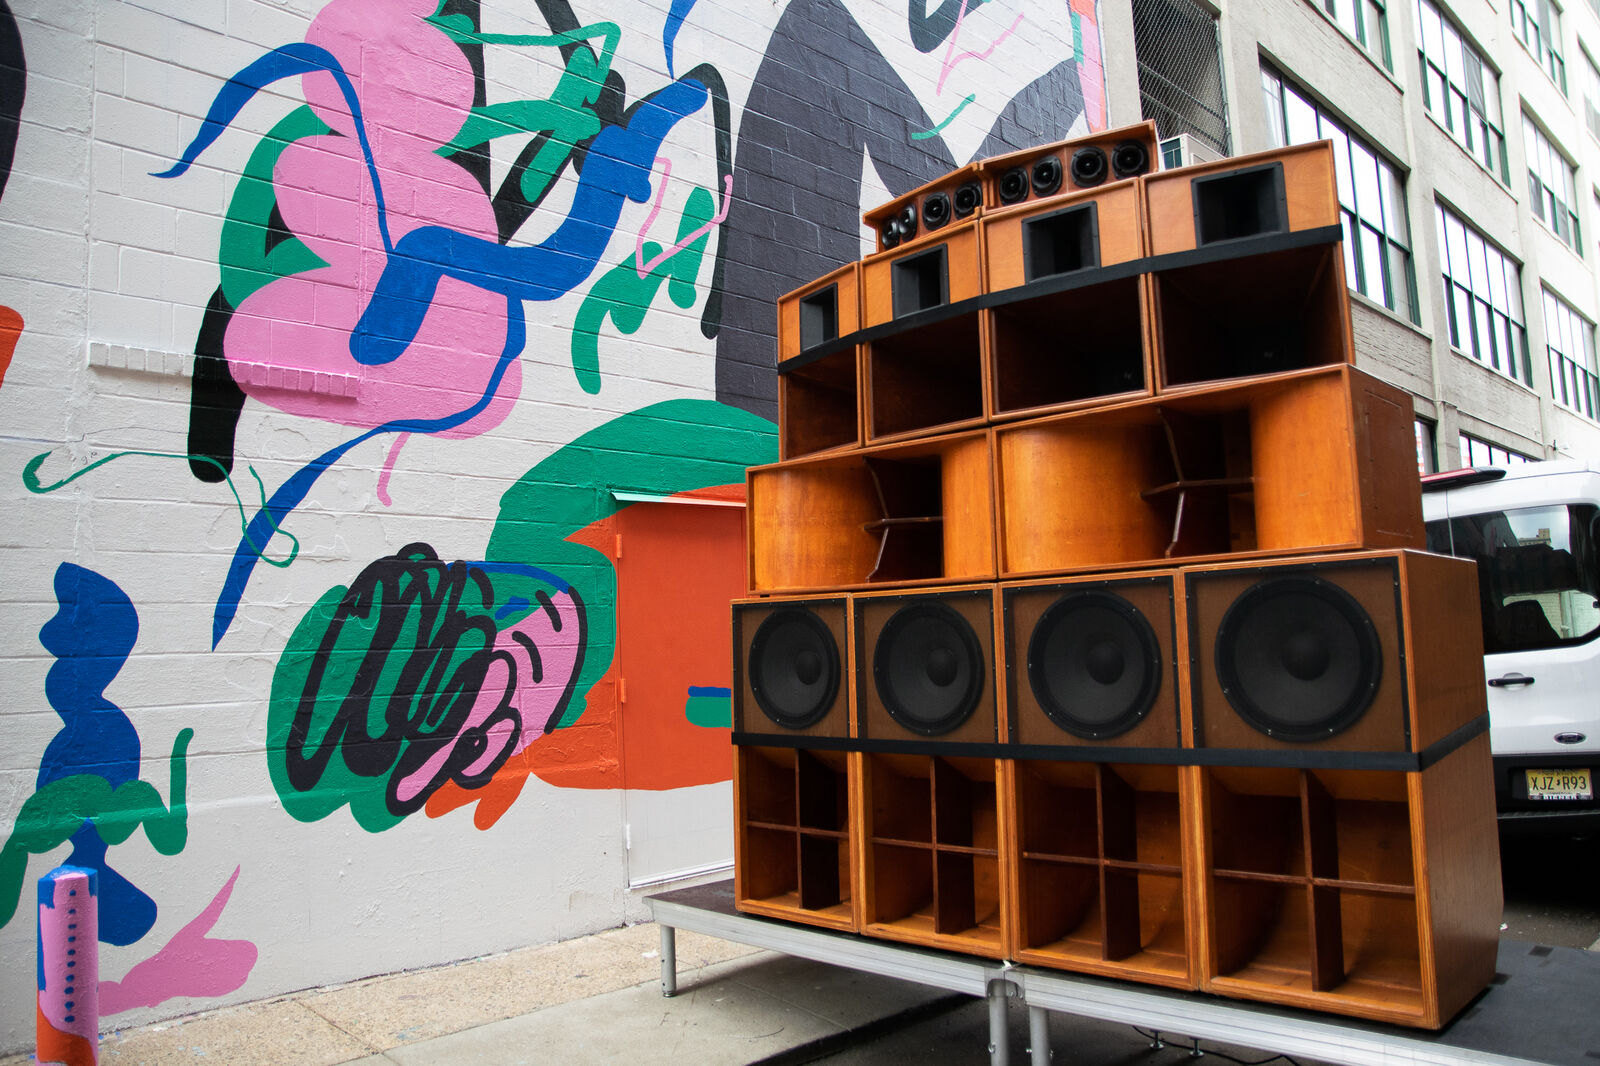 wall of speaker cabinets in the street in front a colorful abstract mural